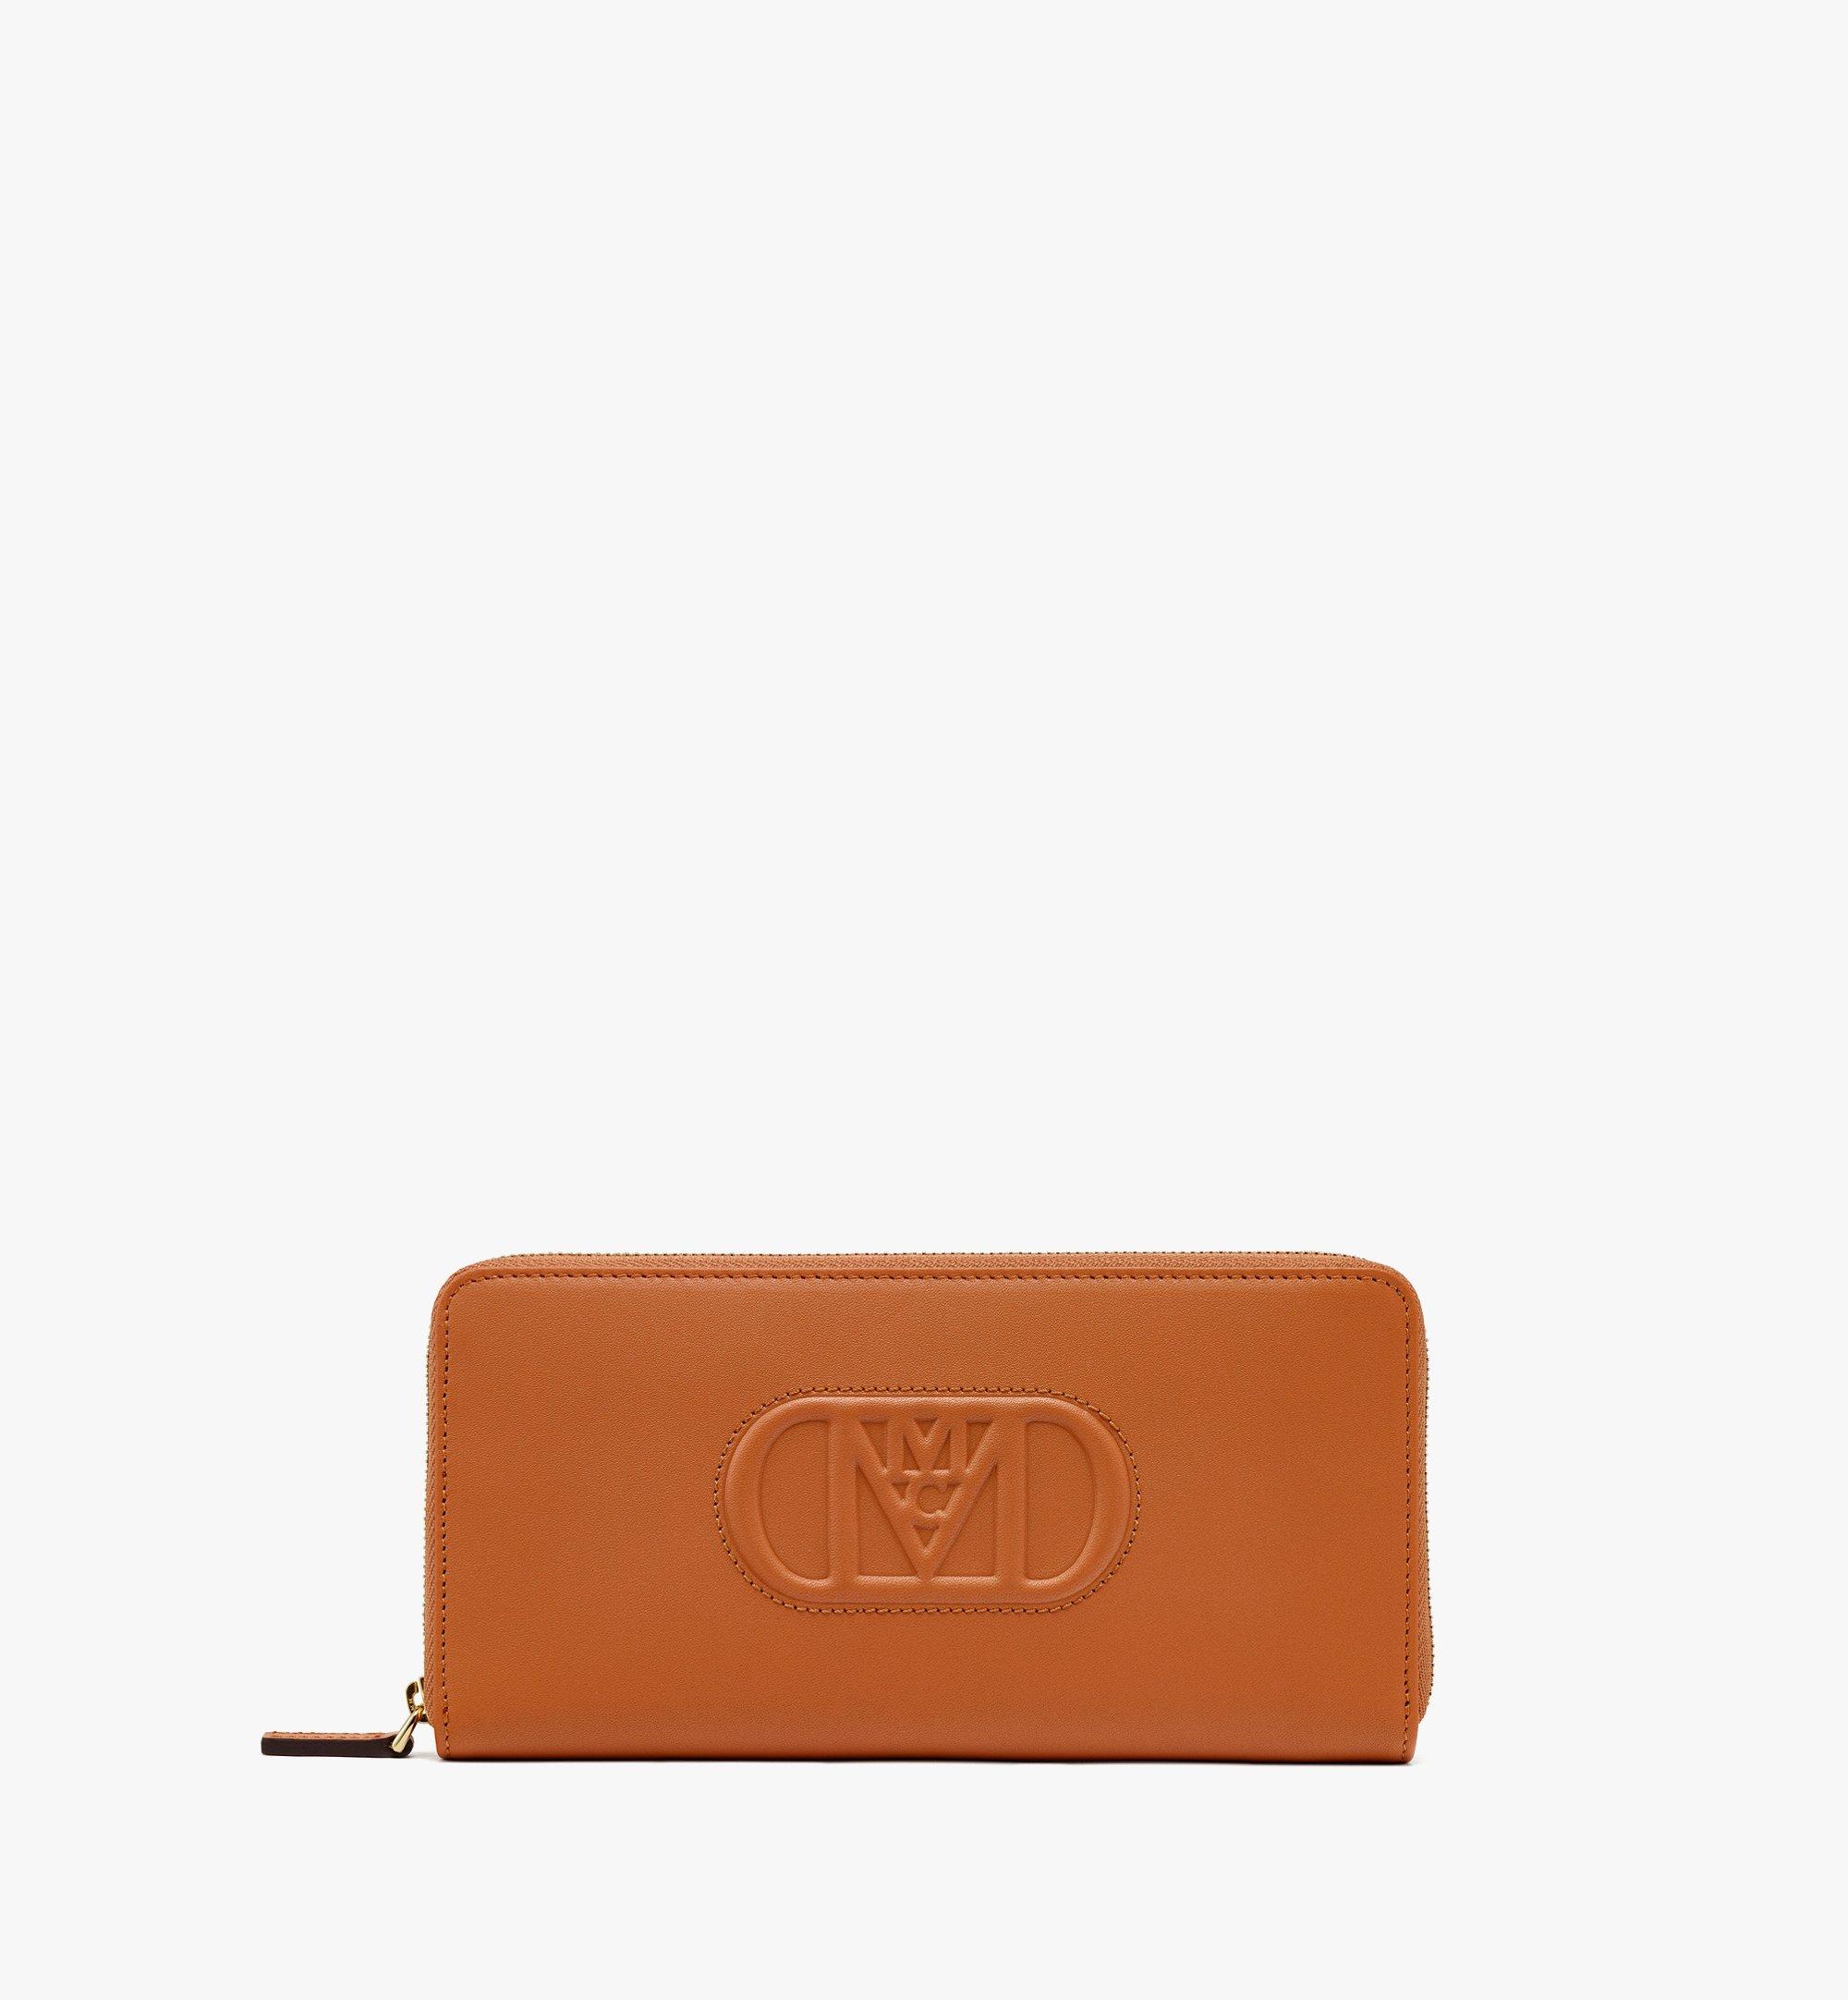 MCM Mode Travia Zip Around Wallet in Spanish Nappa Leather